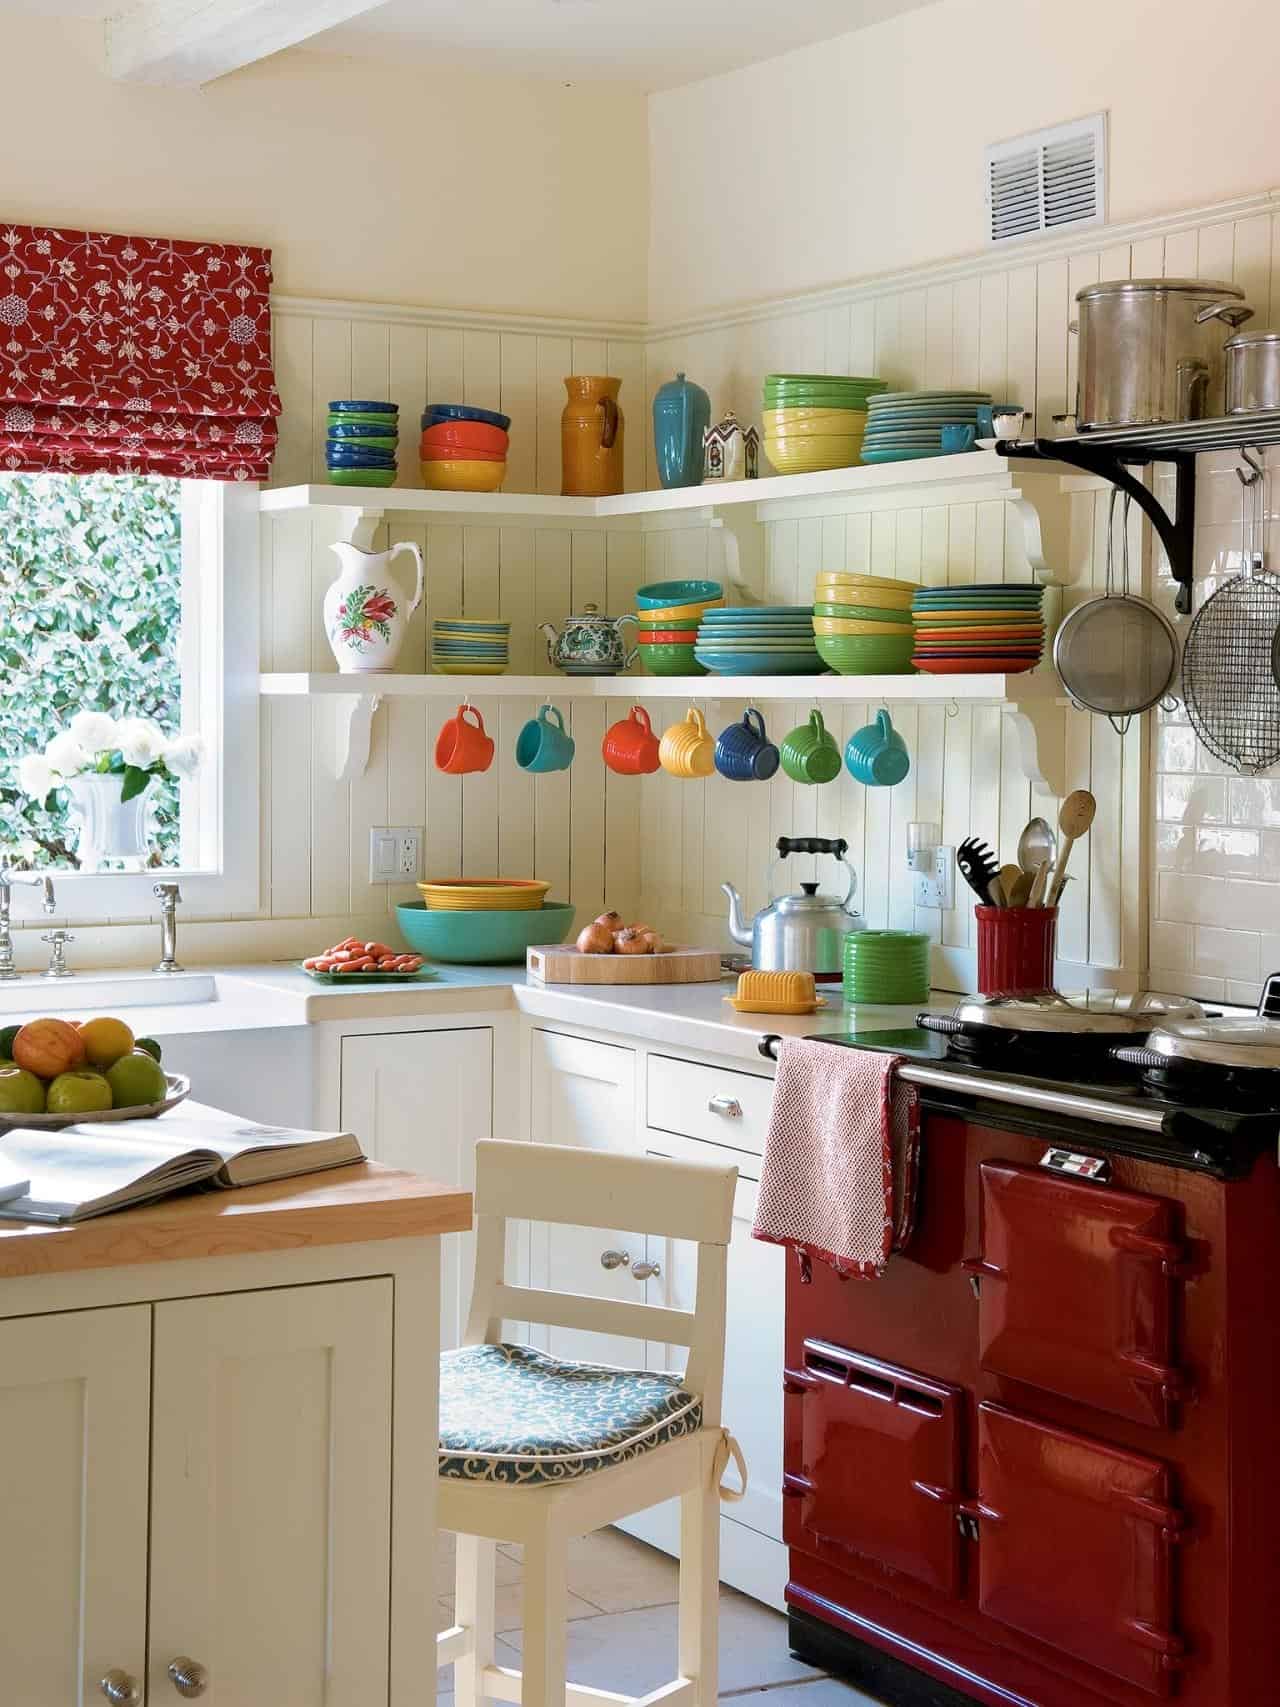 Best Coastal Kitchen Ideas With Colorful Serveware And Glassware